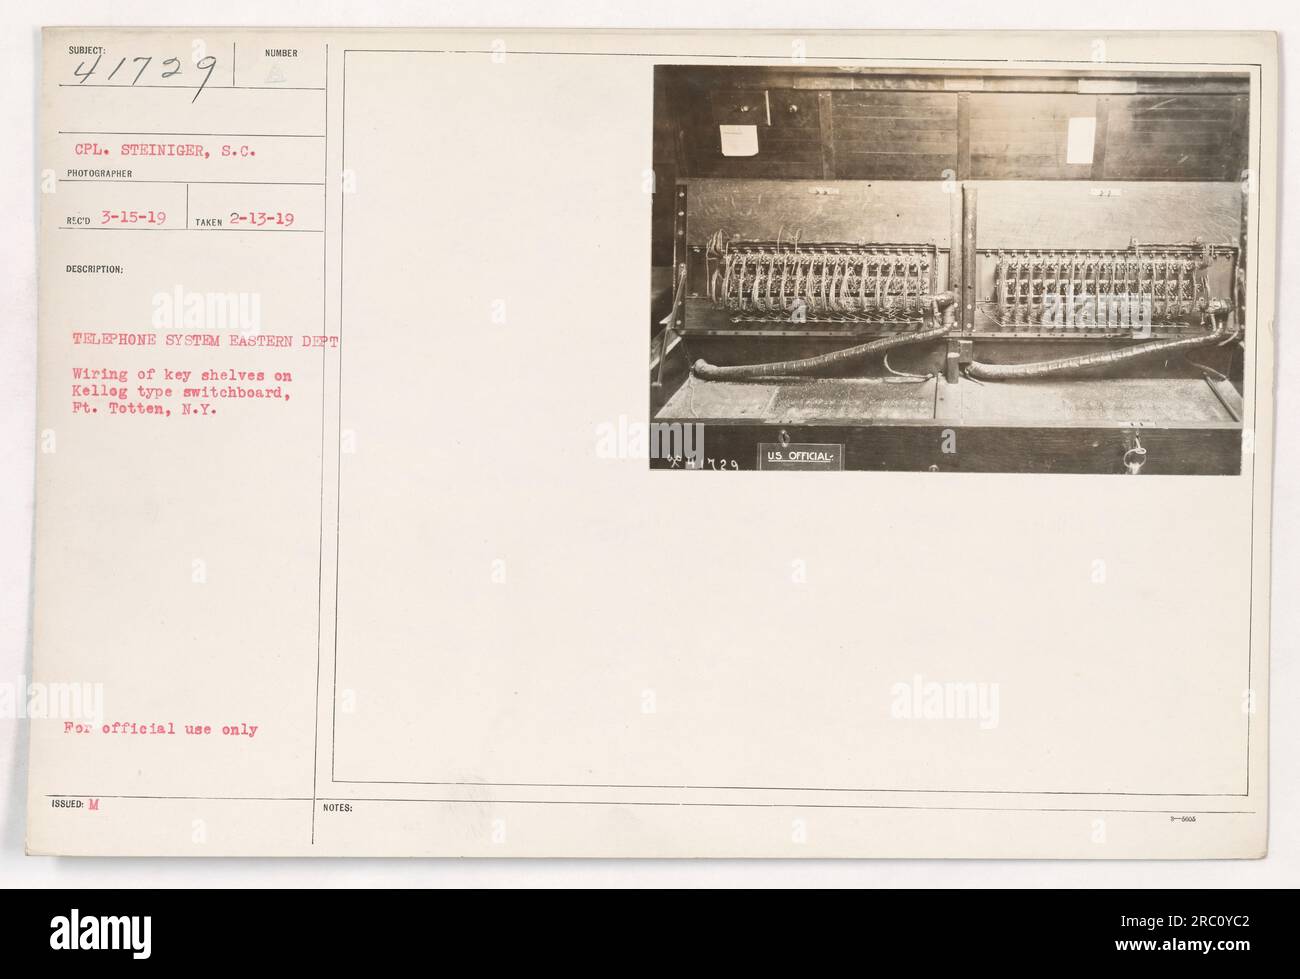 CPL. Steiniger, a photographer for the Signal Corps, captured this image on February 13, 1919, at Pt. Totten, New York. It shows the wiring of key shelves on a Kellog type switchboard, part of the number telephone system used by the Eastern Department during World War I. This photograph is for official use only. Stock Photo